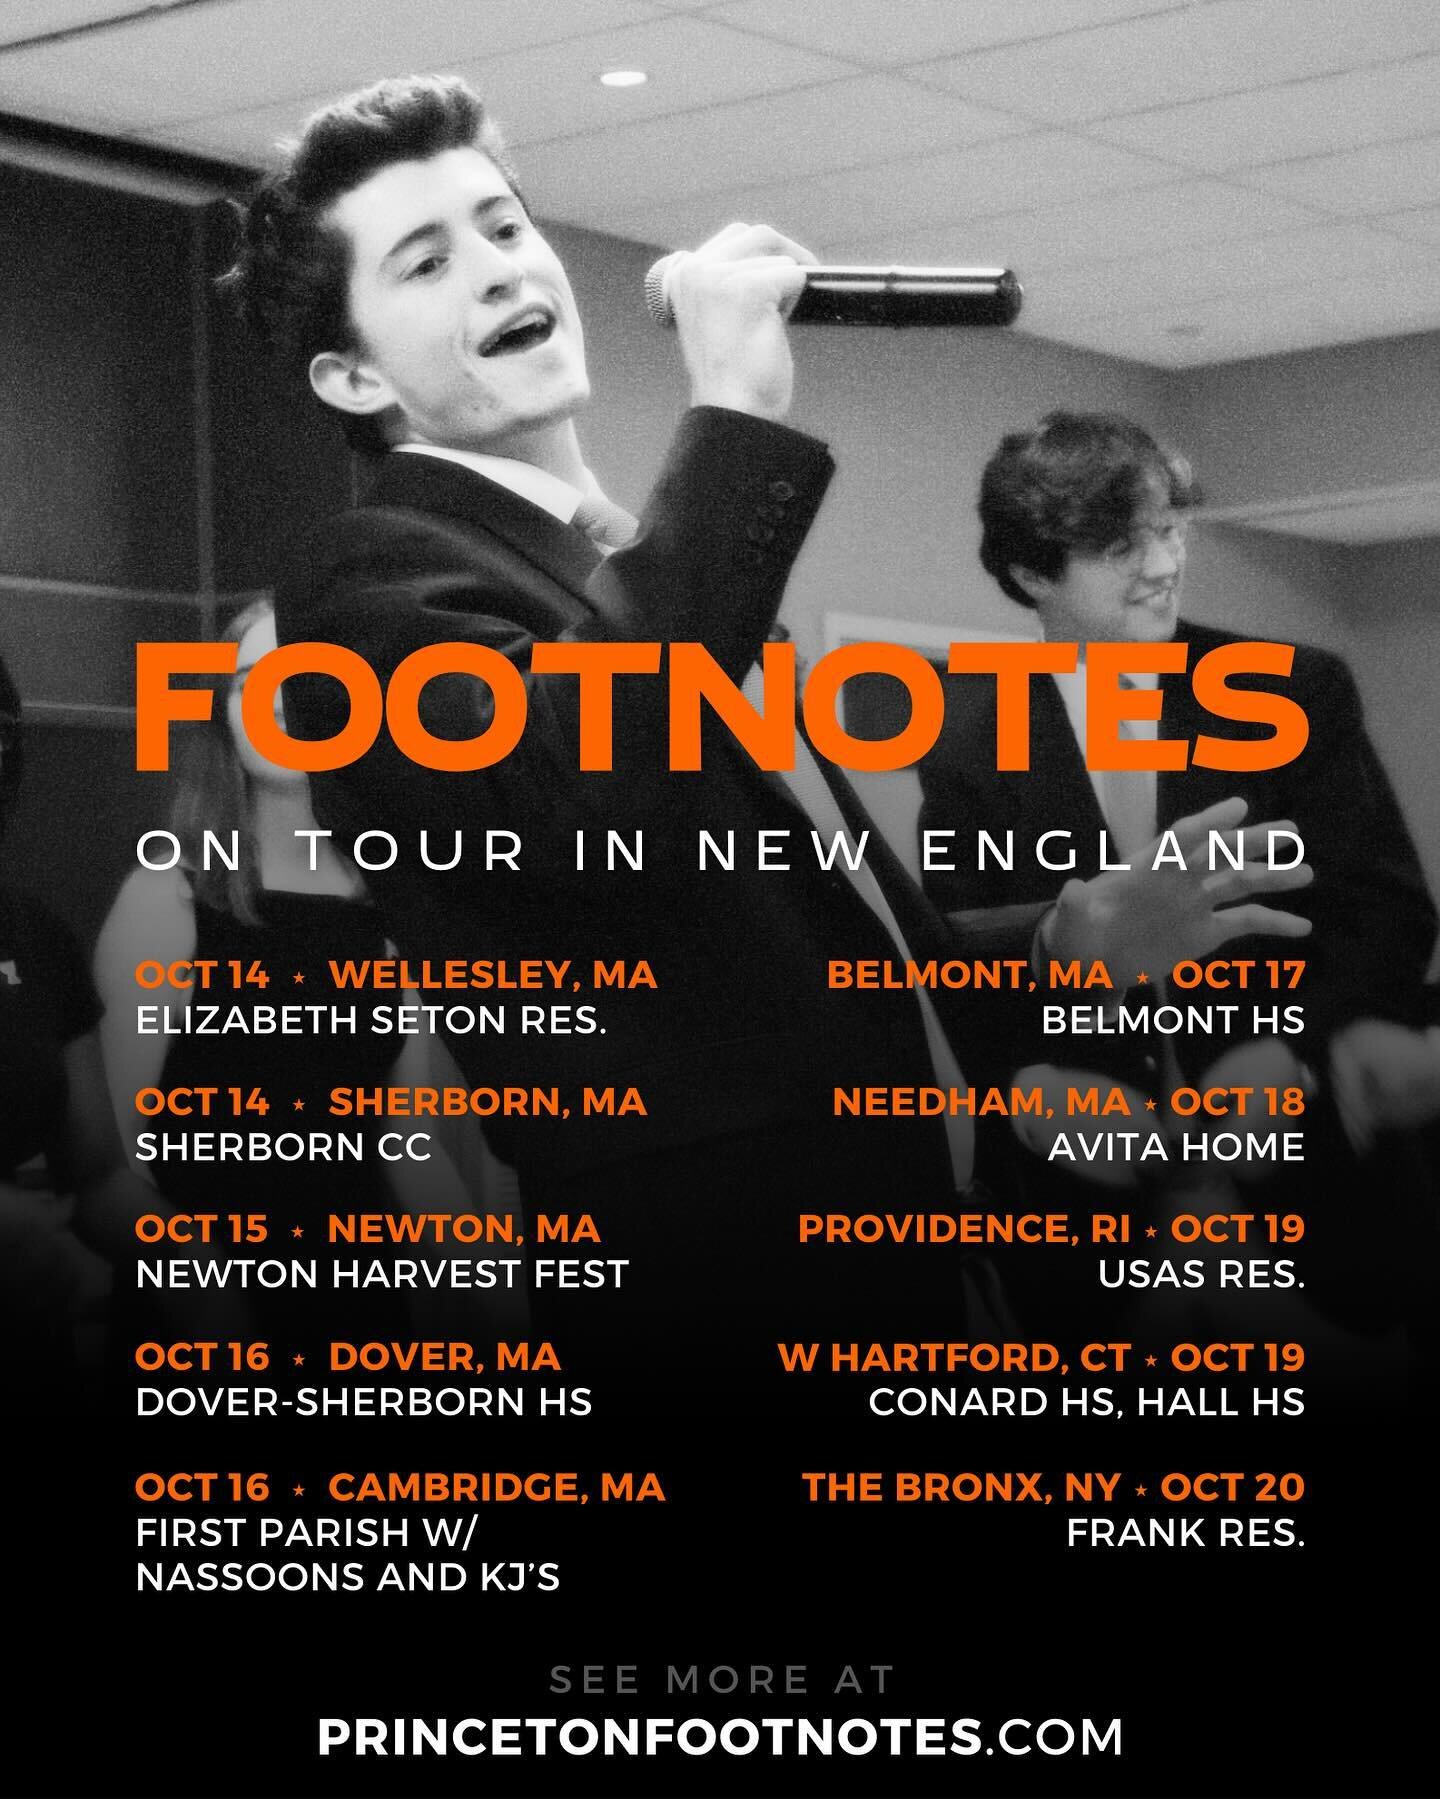 FOOTNOTES: ON TOUR in NEW ENGLAND!!!

To those who have had us thus far, thank you! It has been such a pleasure! And to those we have yet to sing for, we can&rsquo;t wait!

Love,
The Feet 💜🧡💚

(little late to the post teehee)